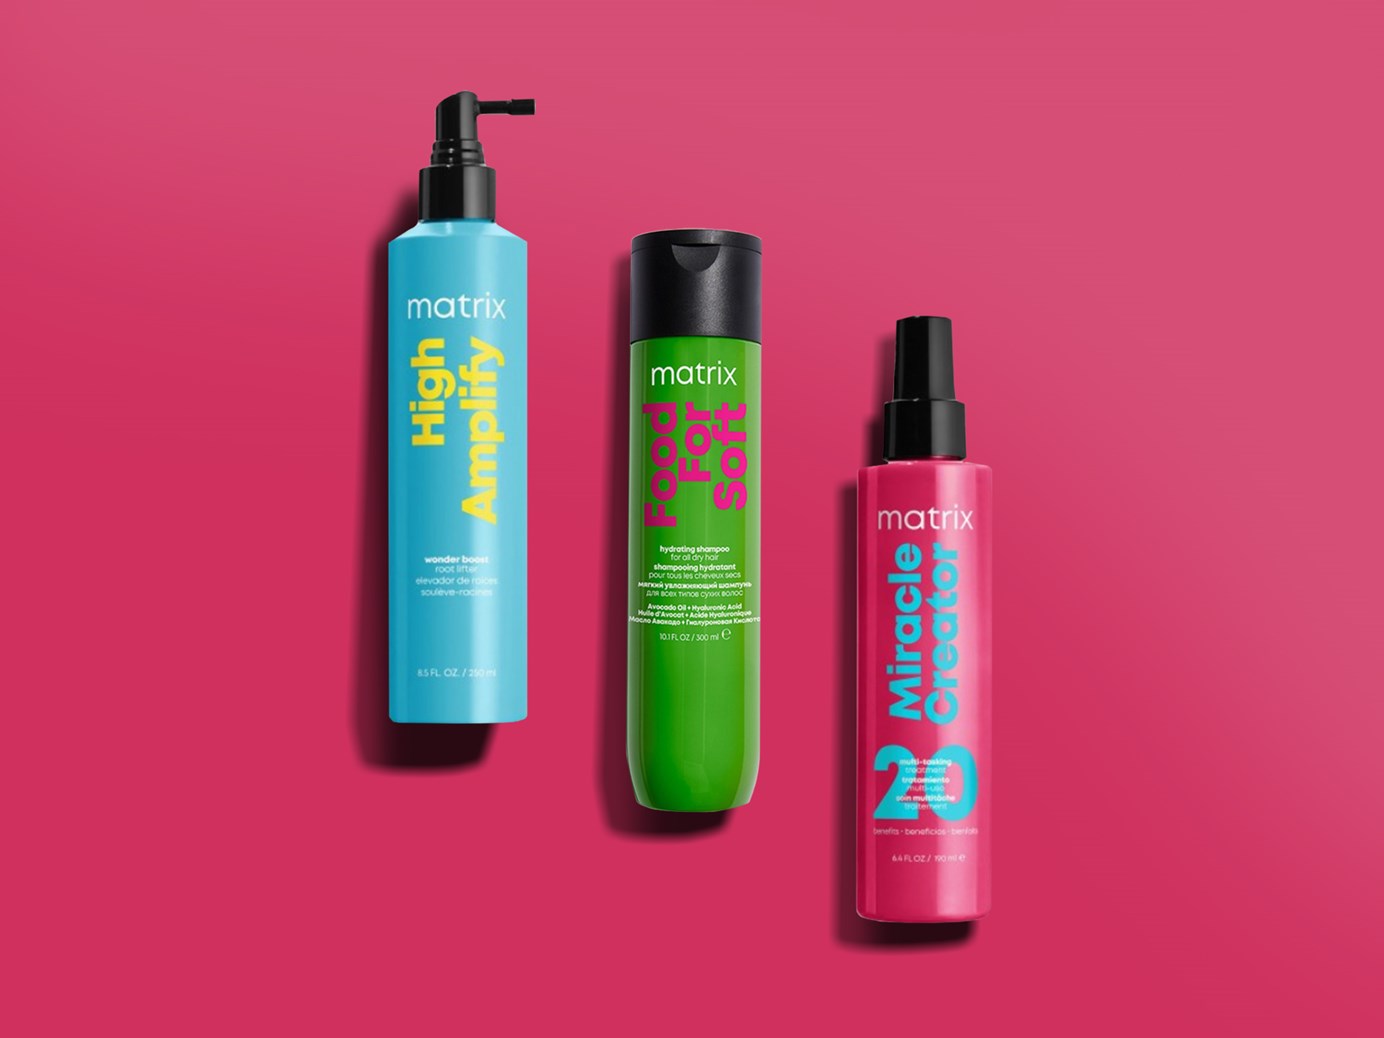 Buy Matrix hair products? Free gift